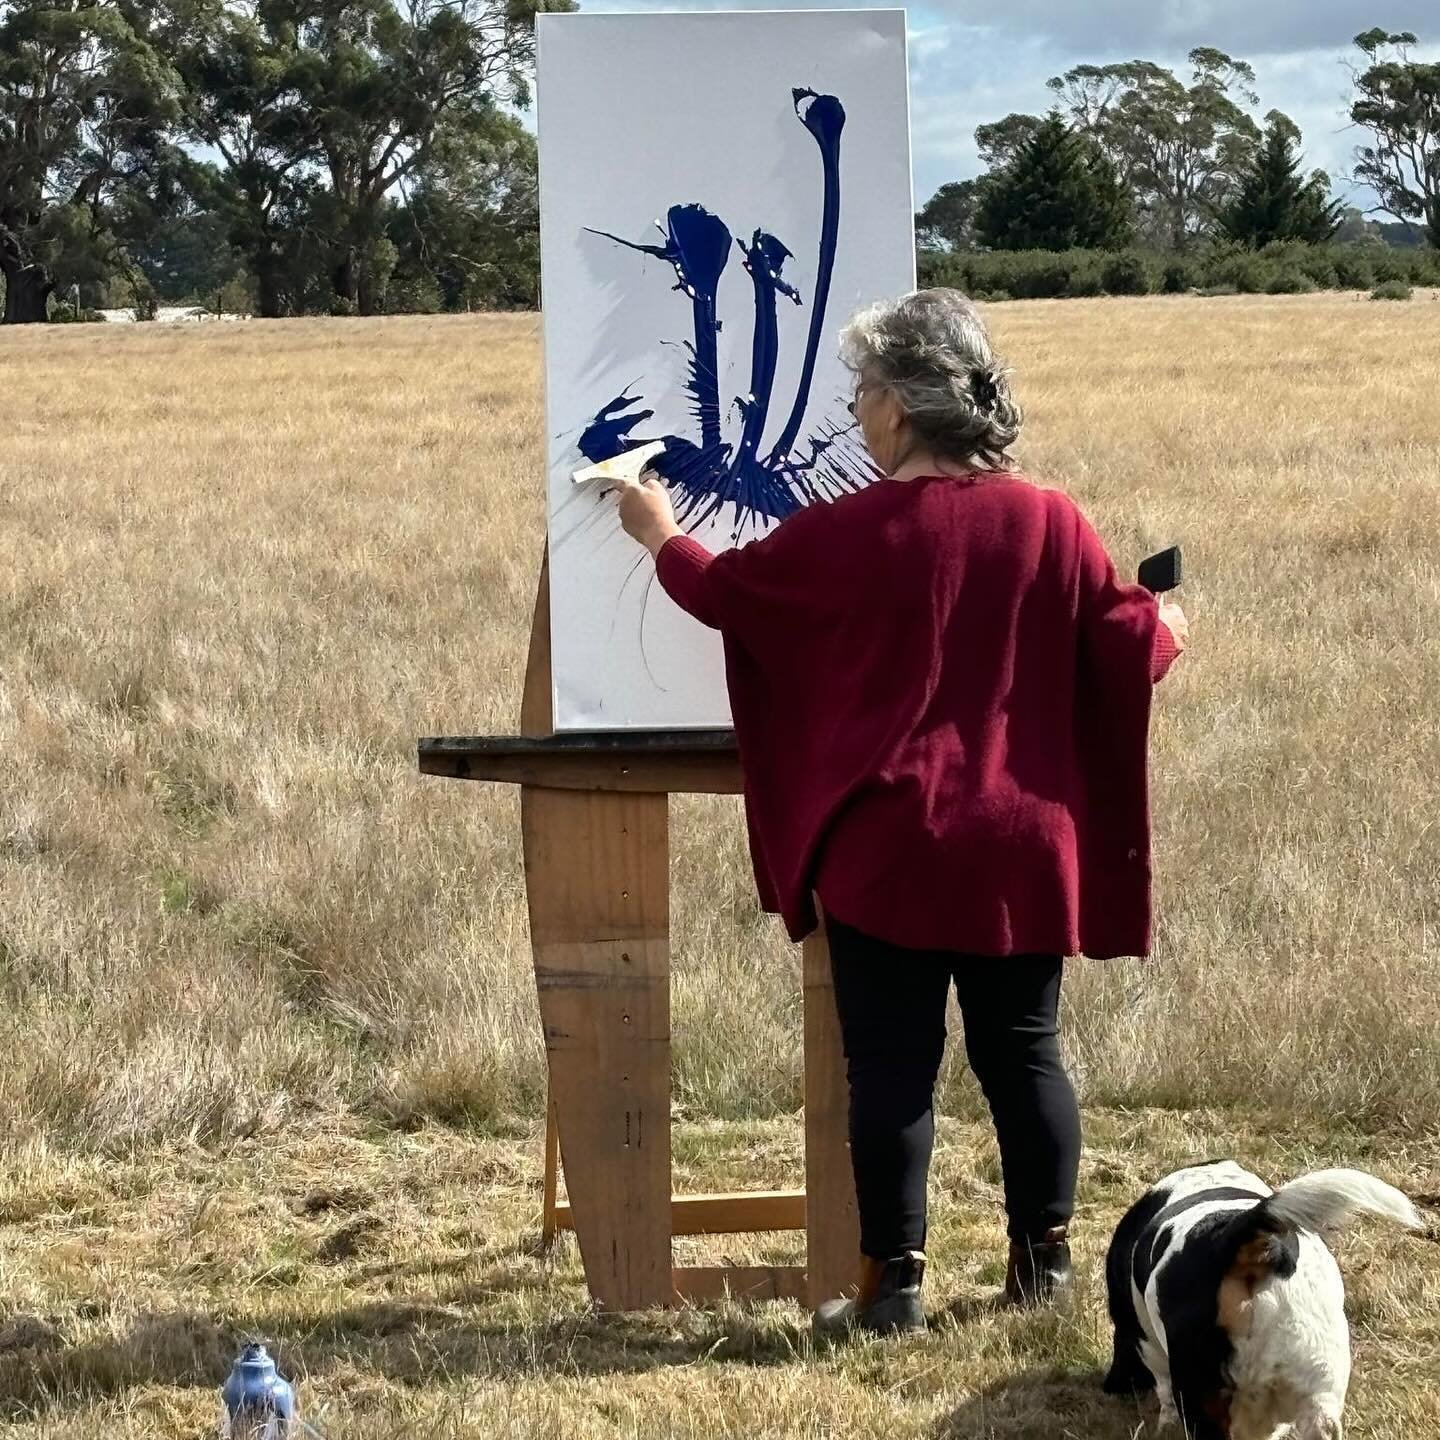 On Friday we had the privilege of going out to Pipers Creek with our friends from Uniting Engagement Hub to paint the beautiful scenery!

A special day for everyone involved 💜